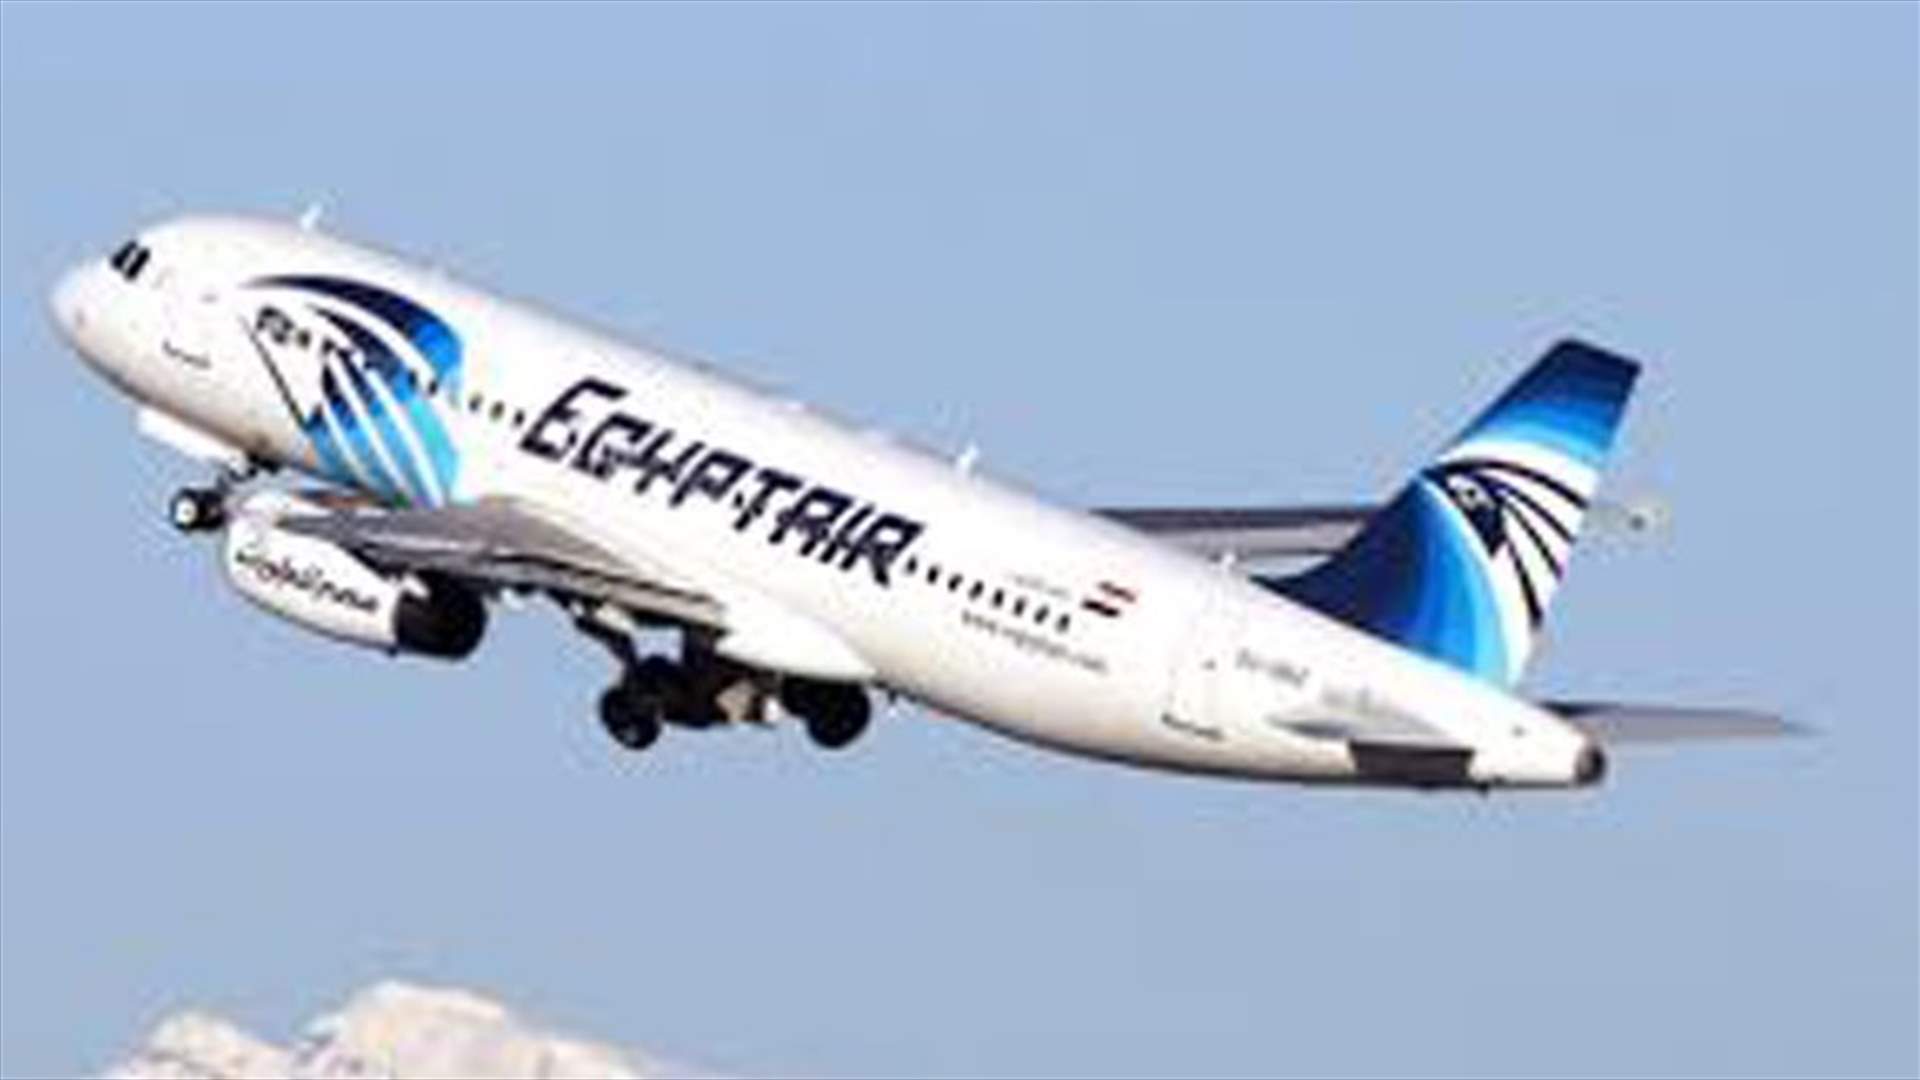 Data files from crashed EgyptAir plane sent back to Egypt